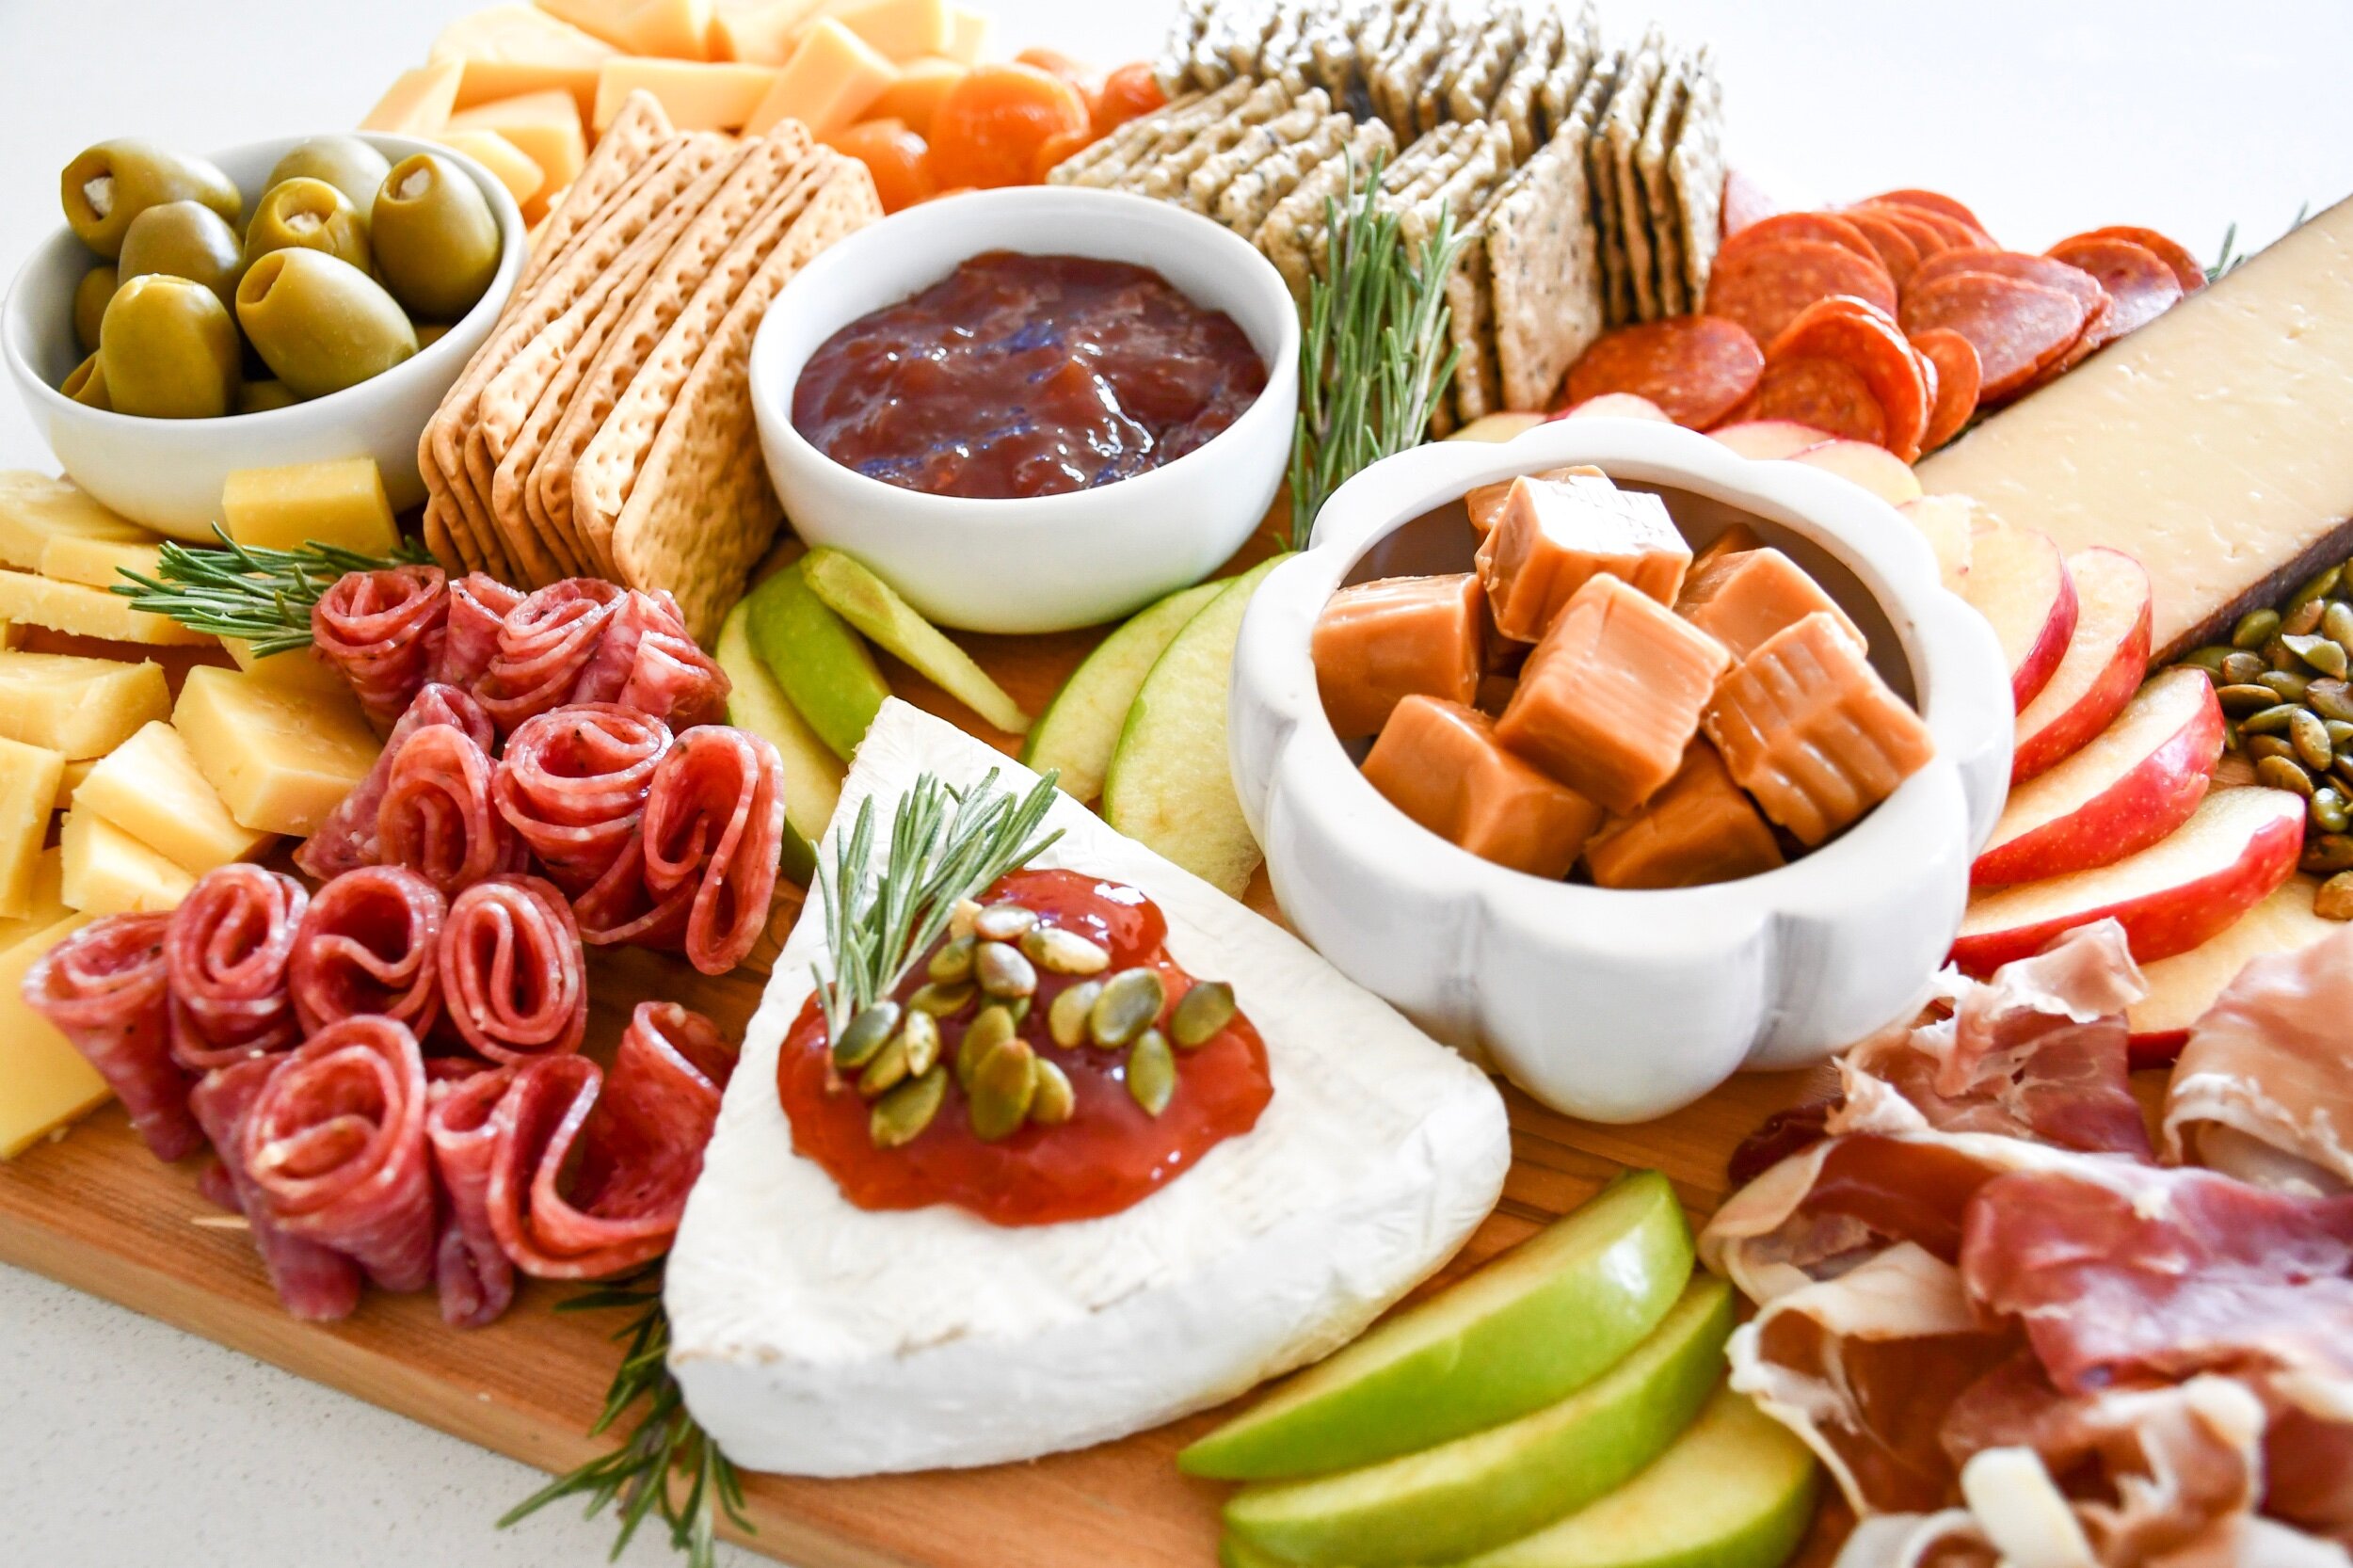 Fall Inspired Charcuterie Board | tarynintotravel.com |  #cheeseboard #partyfood #foodcenterpiece #charcuterieboard